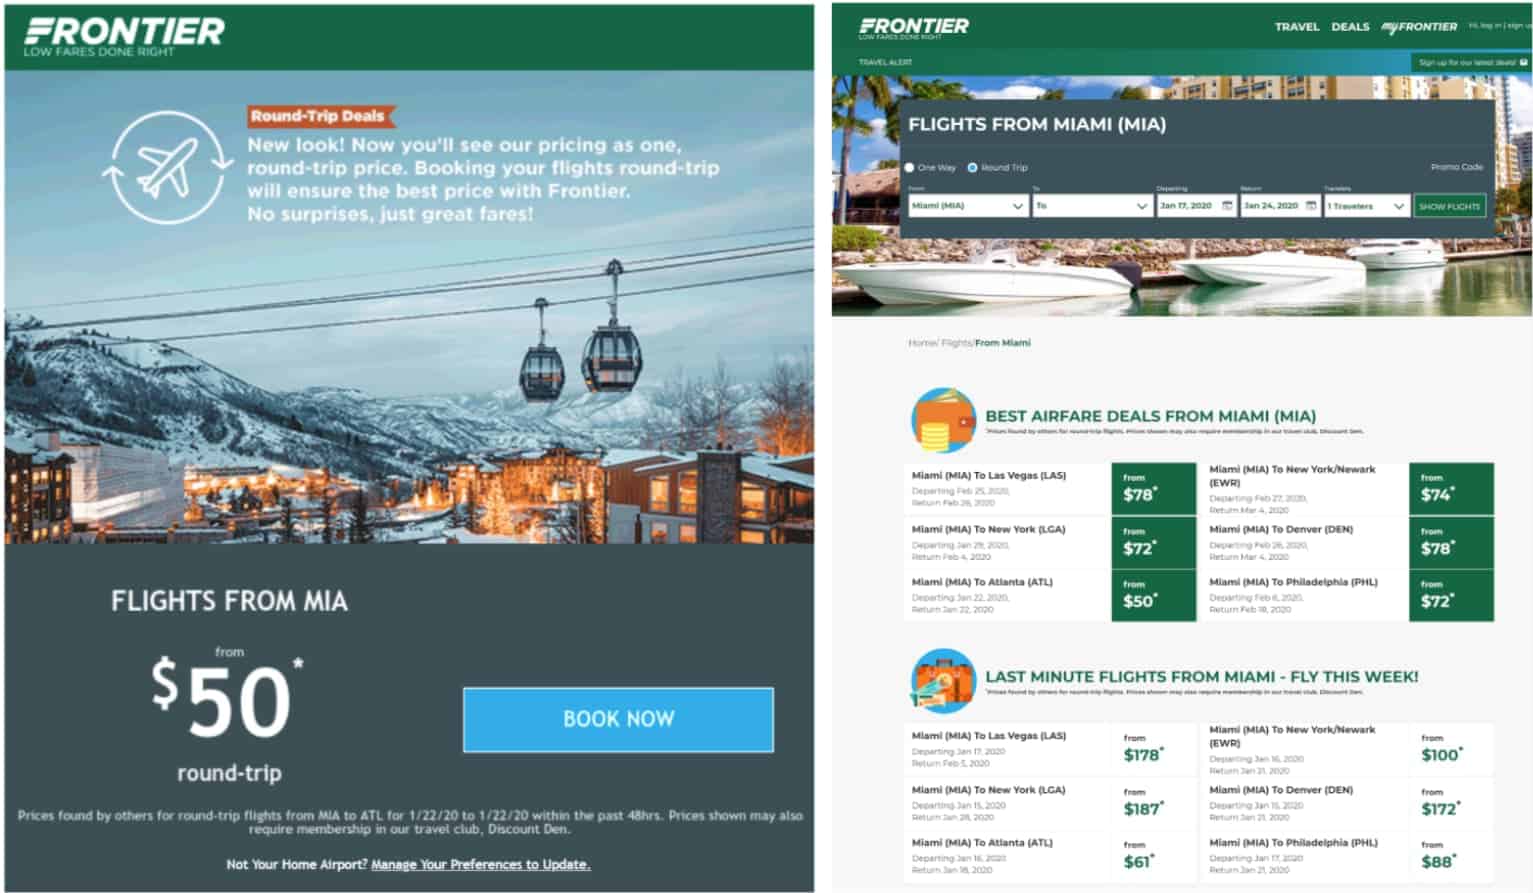 FareWire Dynamic Fares in email